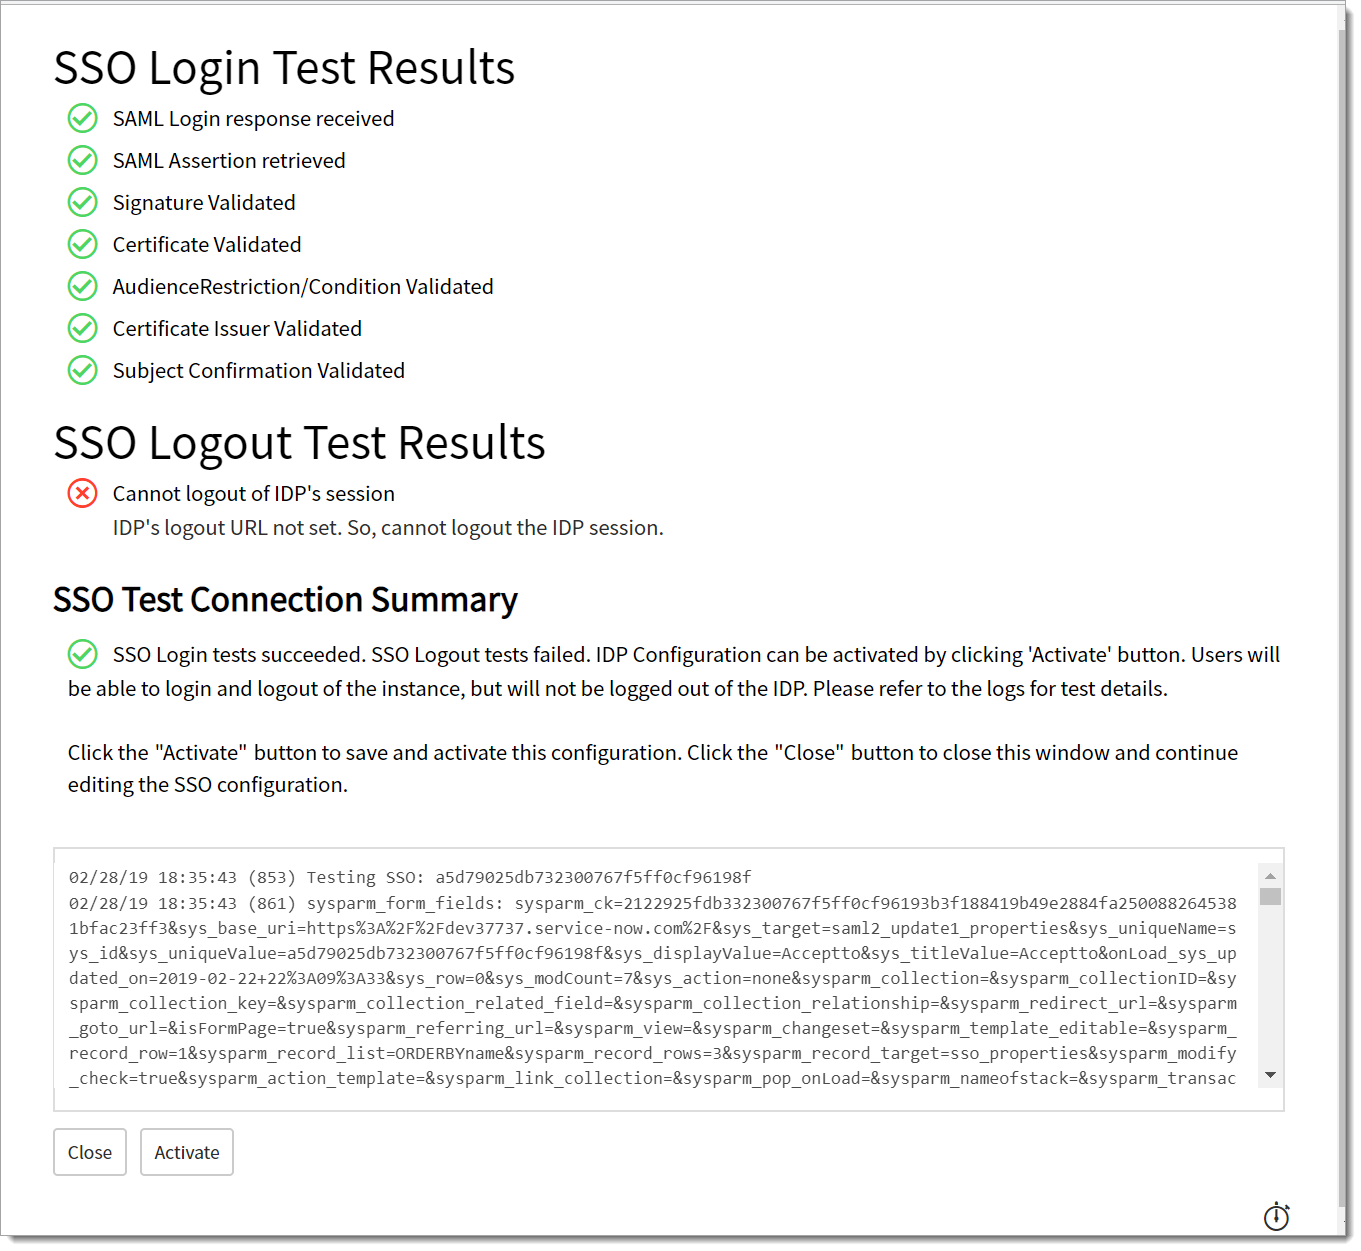 servicenow_sso_test_results.png